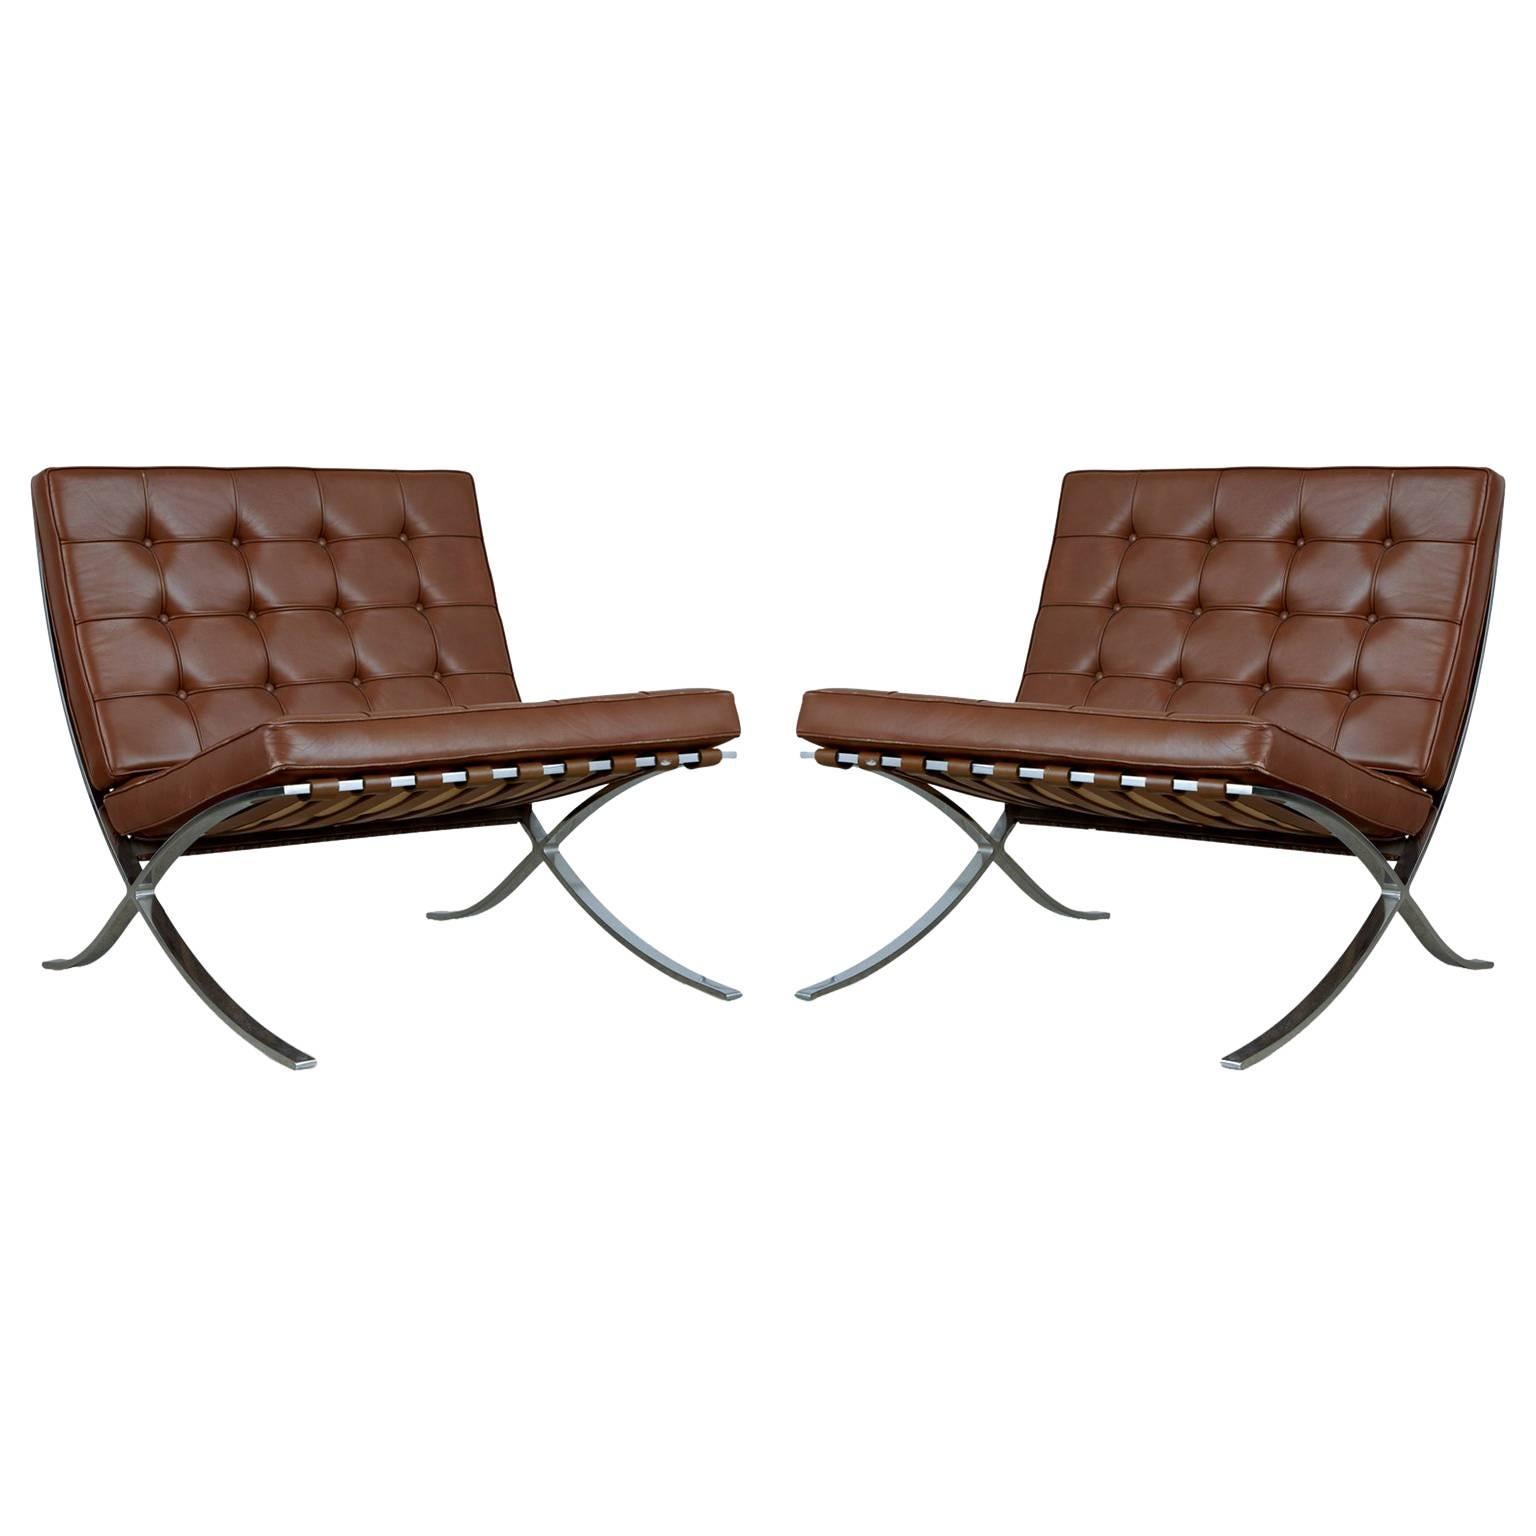 Triple Signed Pair of Barcelona Chairs by Mies Van Der Rohe for Knoll Int, 1978